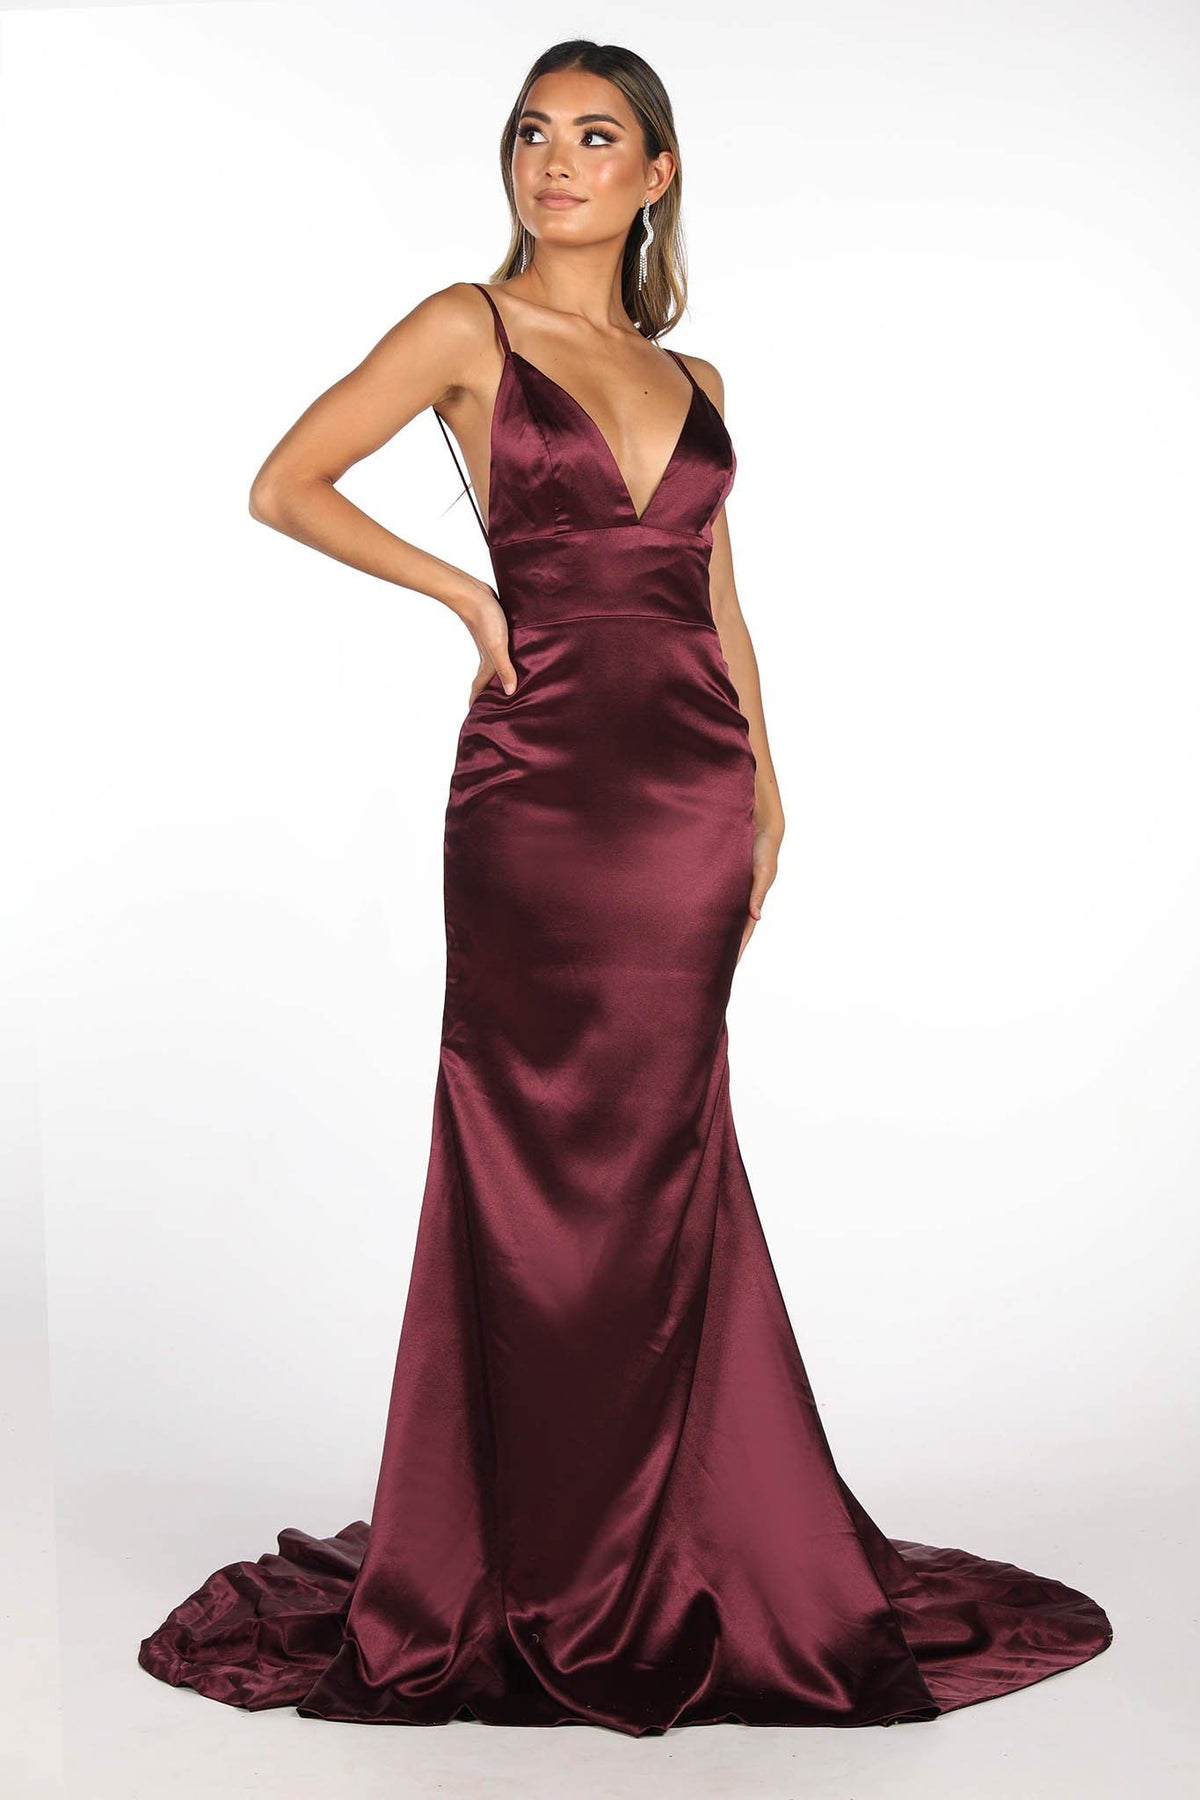 Deep Purple Satin Full Length Evening Long Dress with Deep V Neckline, Thin Shoulder Straps, Open V Backless Style and Sweep Train